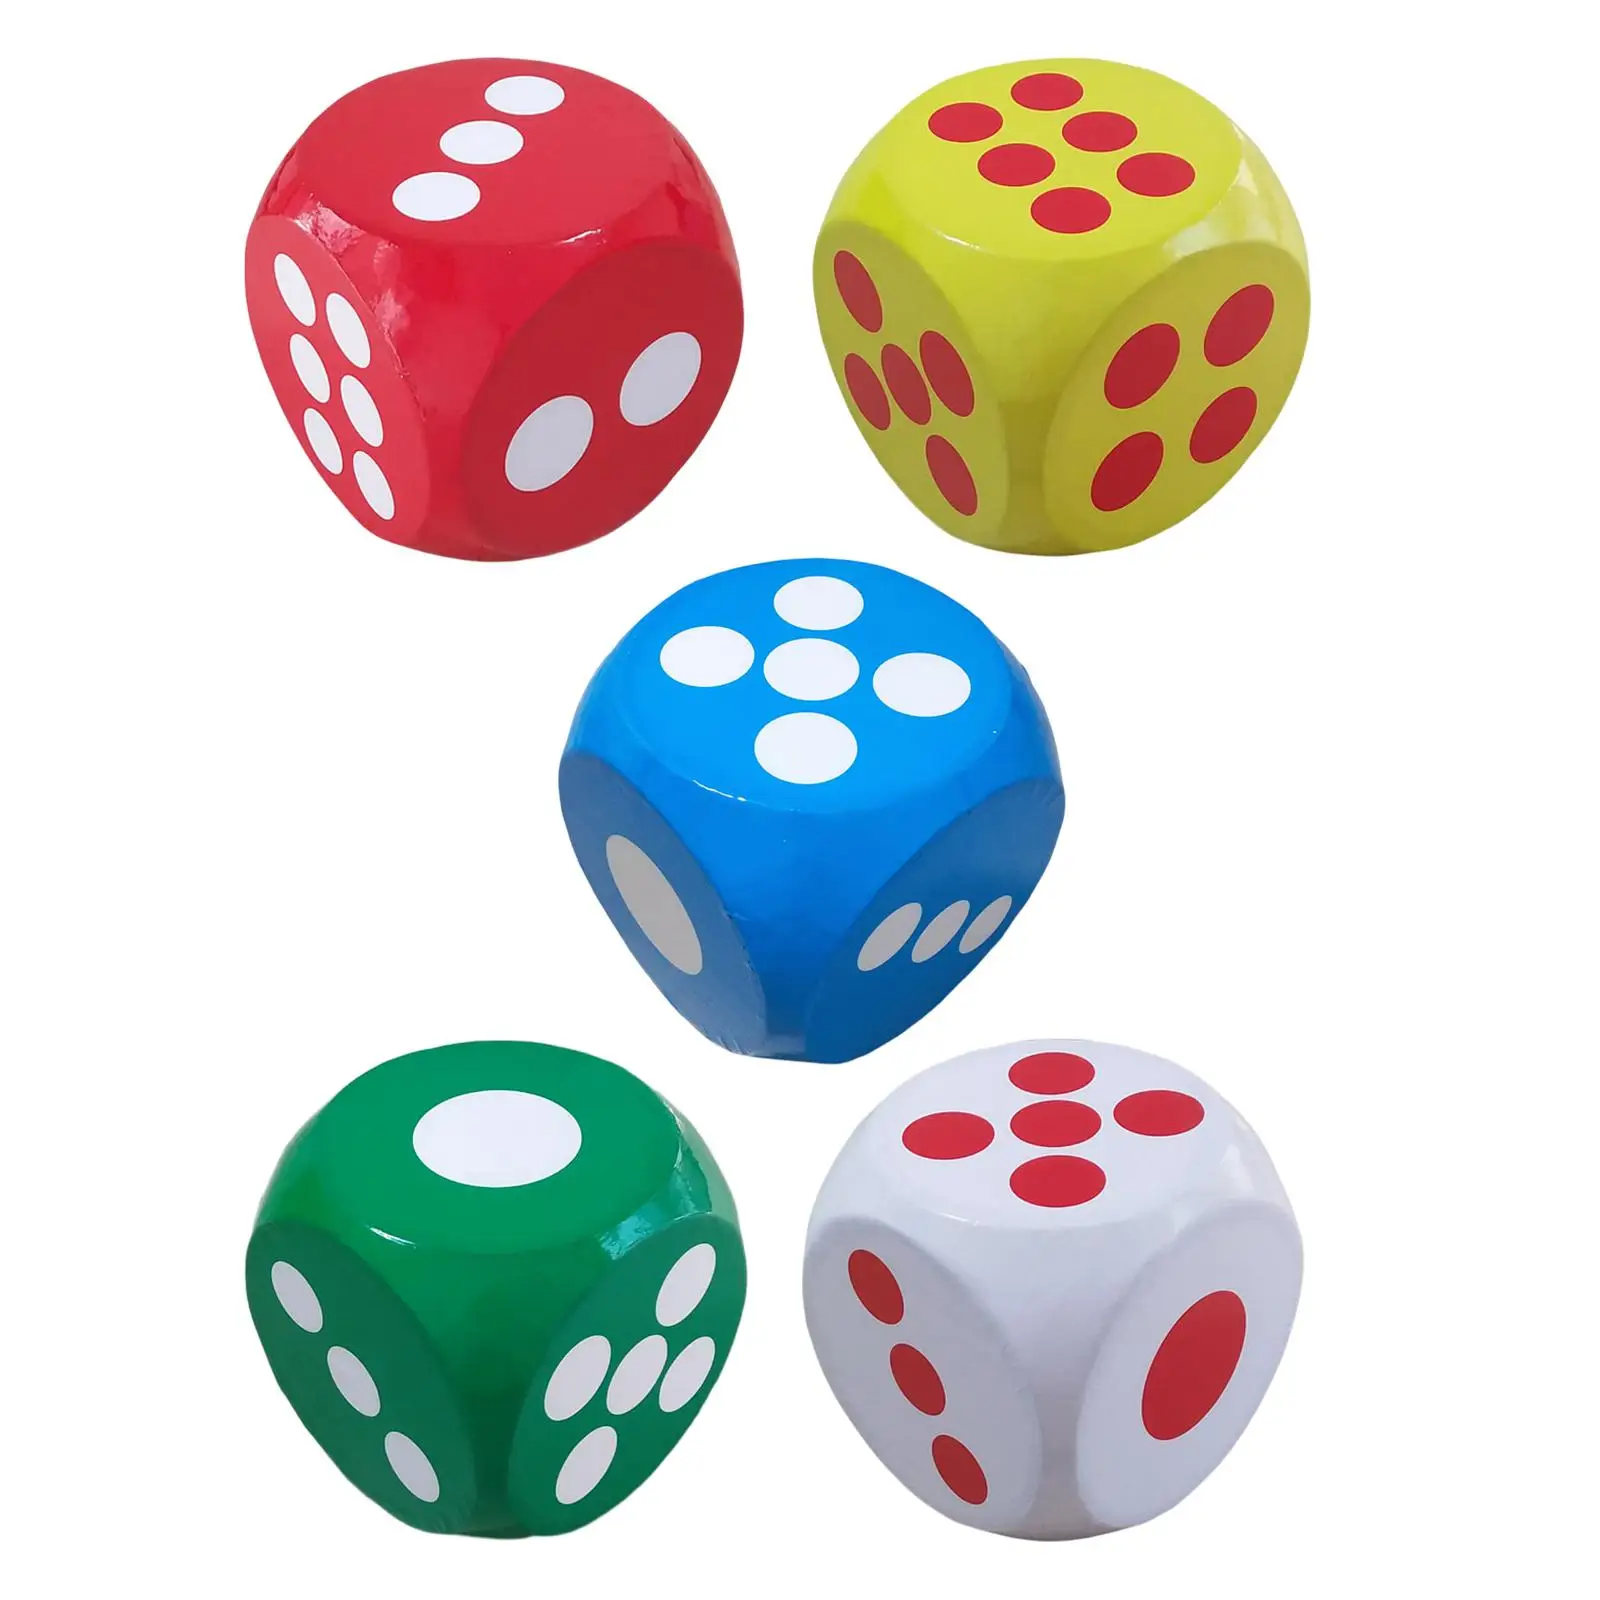 Foam Dice Math Teaching Developmental Toy Stem Game Dice Dice Cubes Block for Kids Indoor Outdoor Party Favors and Supplies